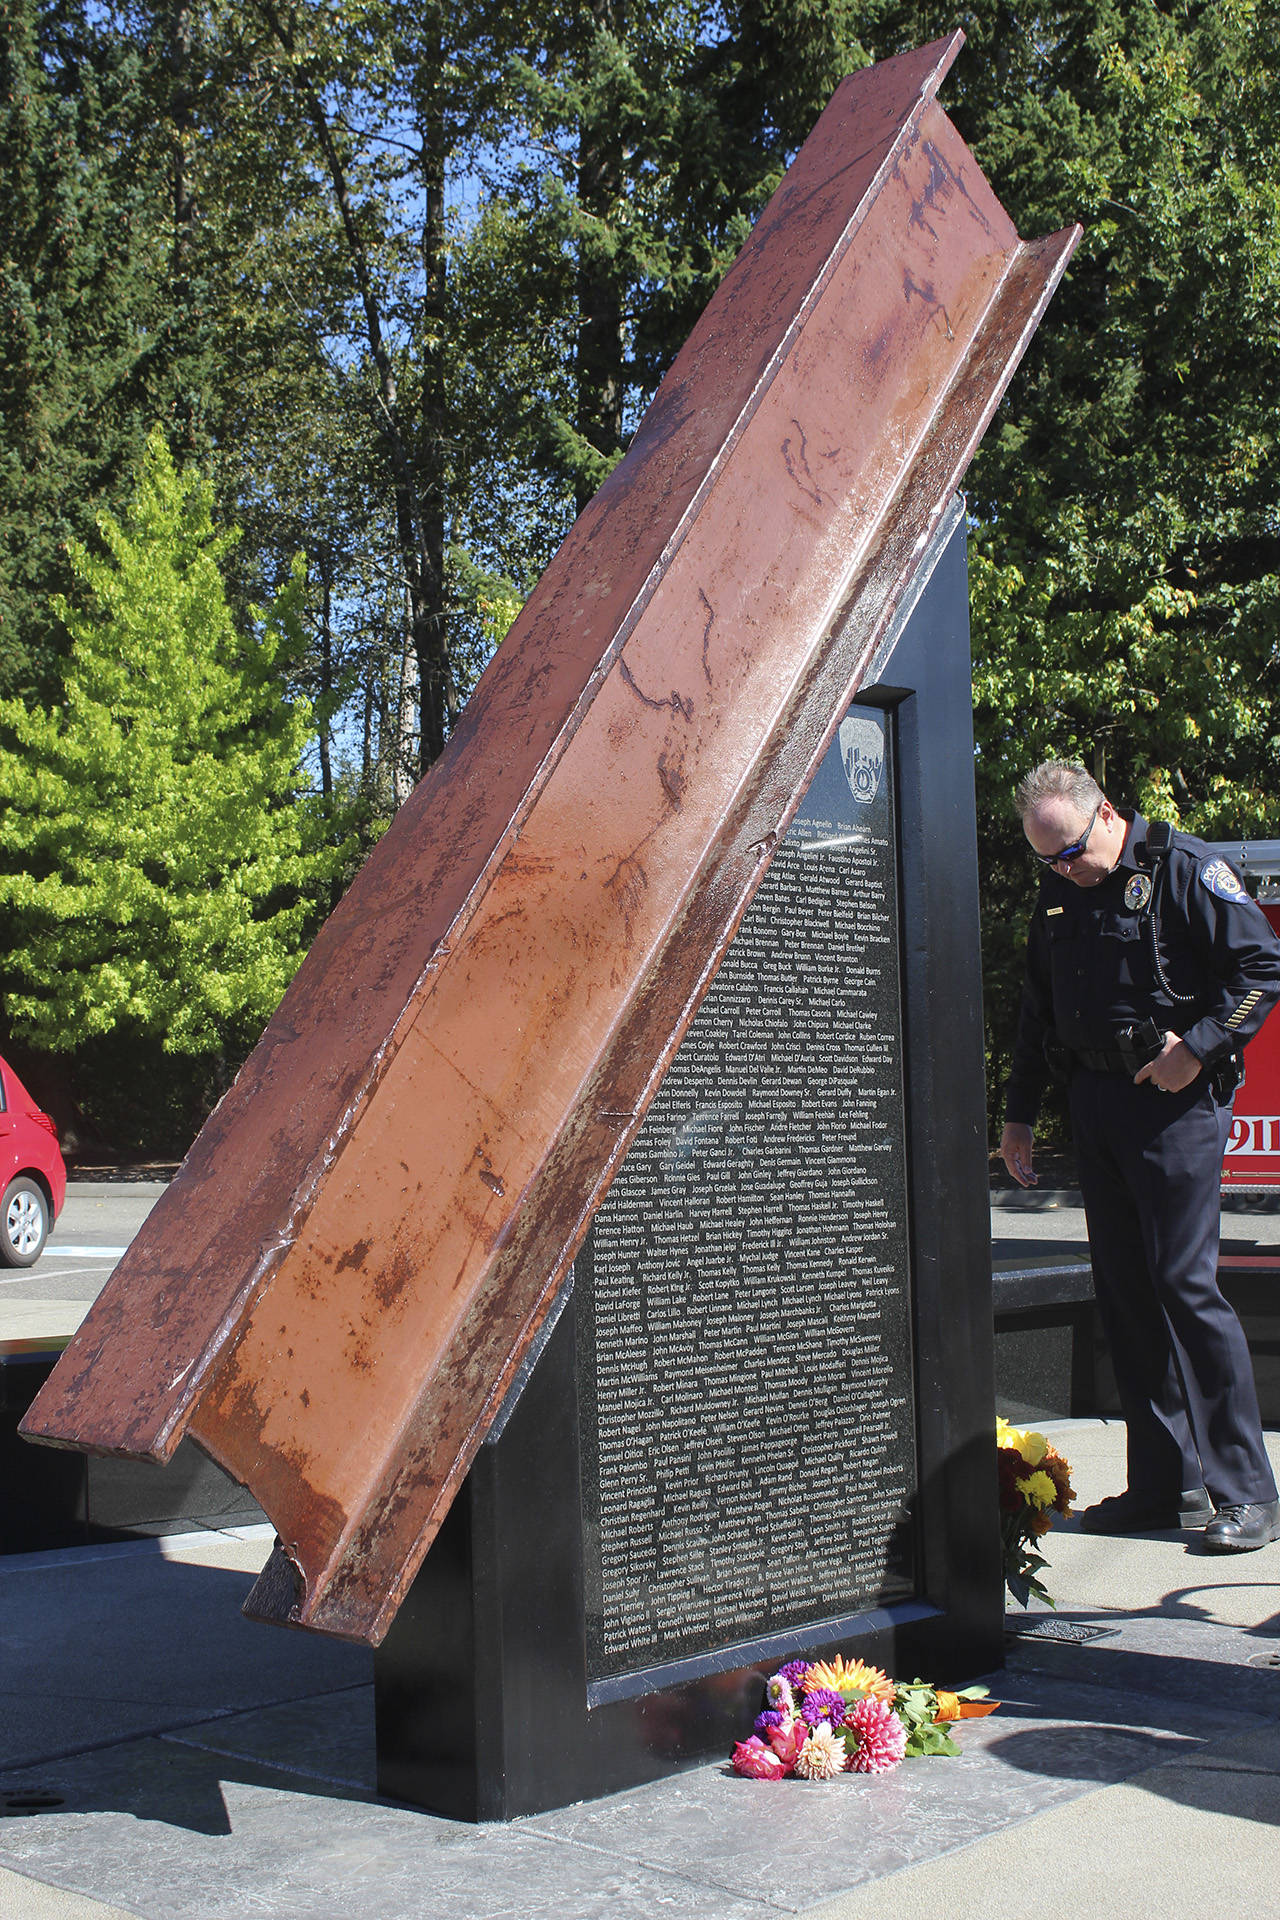 A ceremony was held Monday at South King Fire and Rescue Station 64 to remember the events of Sept. 11, 2001.